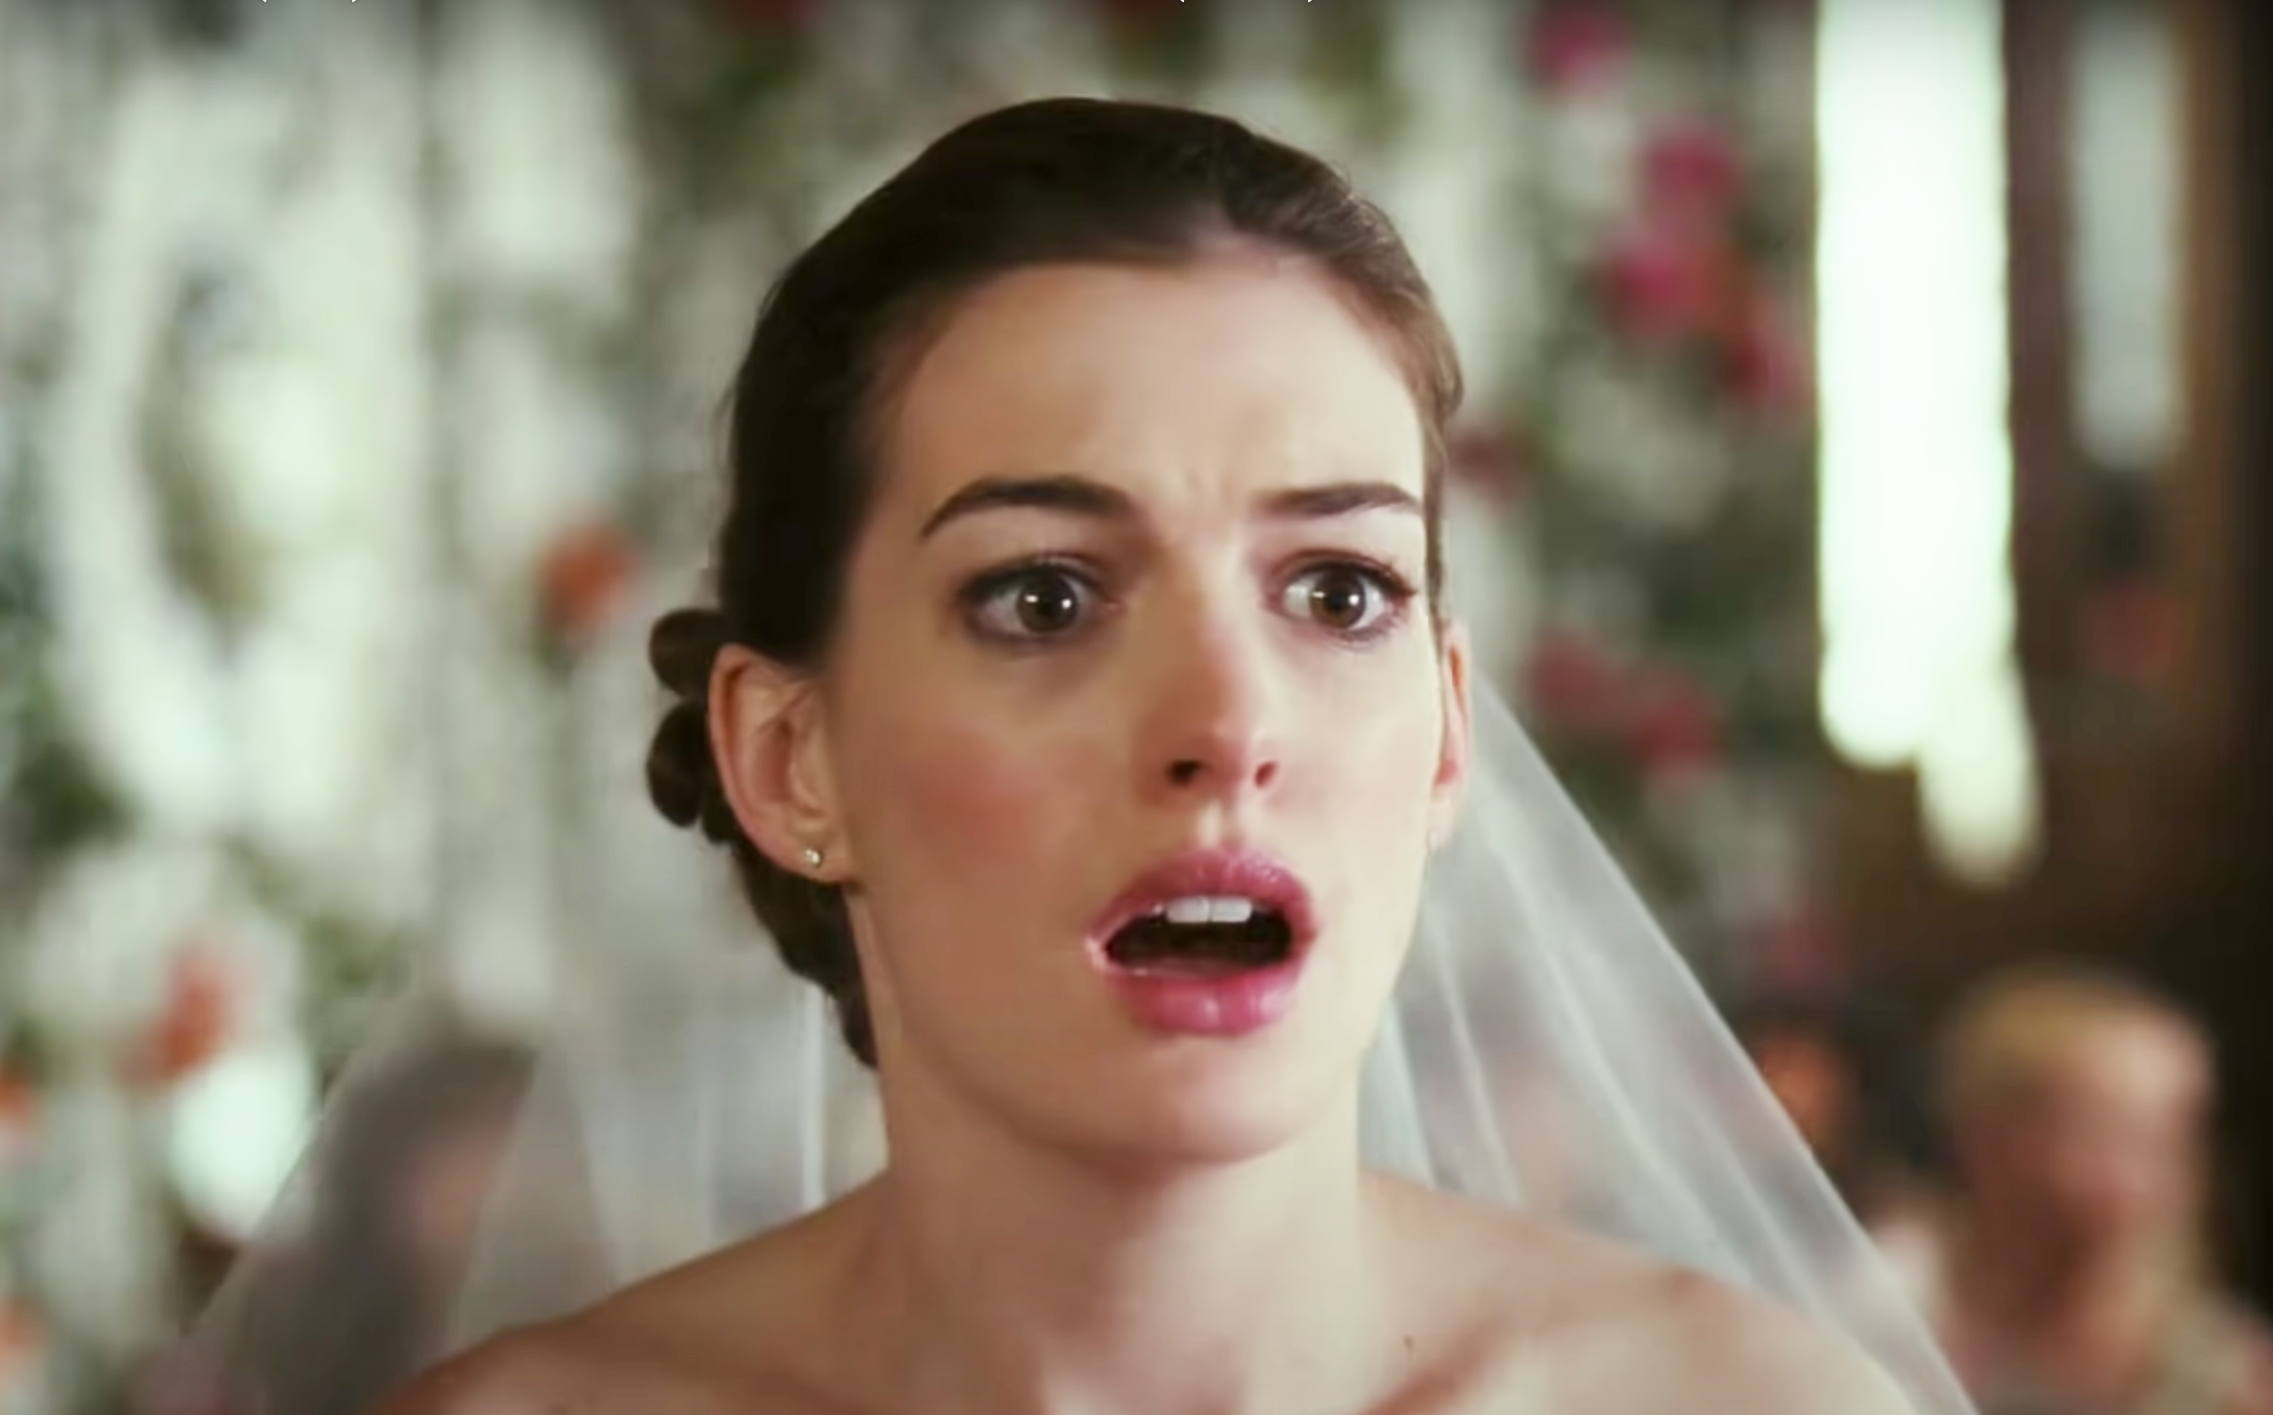 A bride with a shocked expression